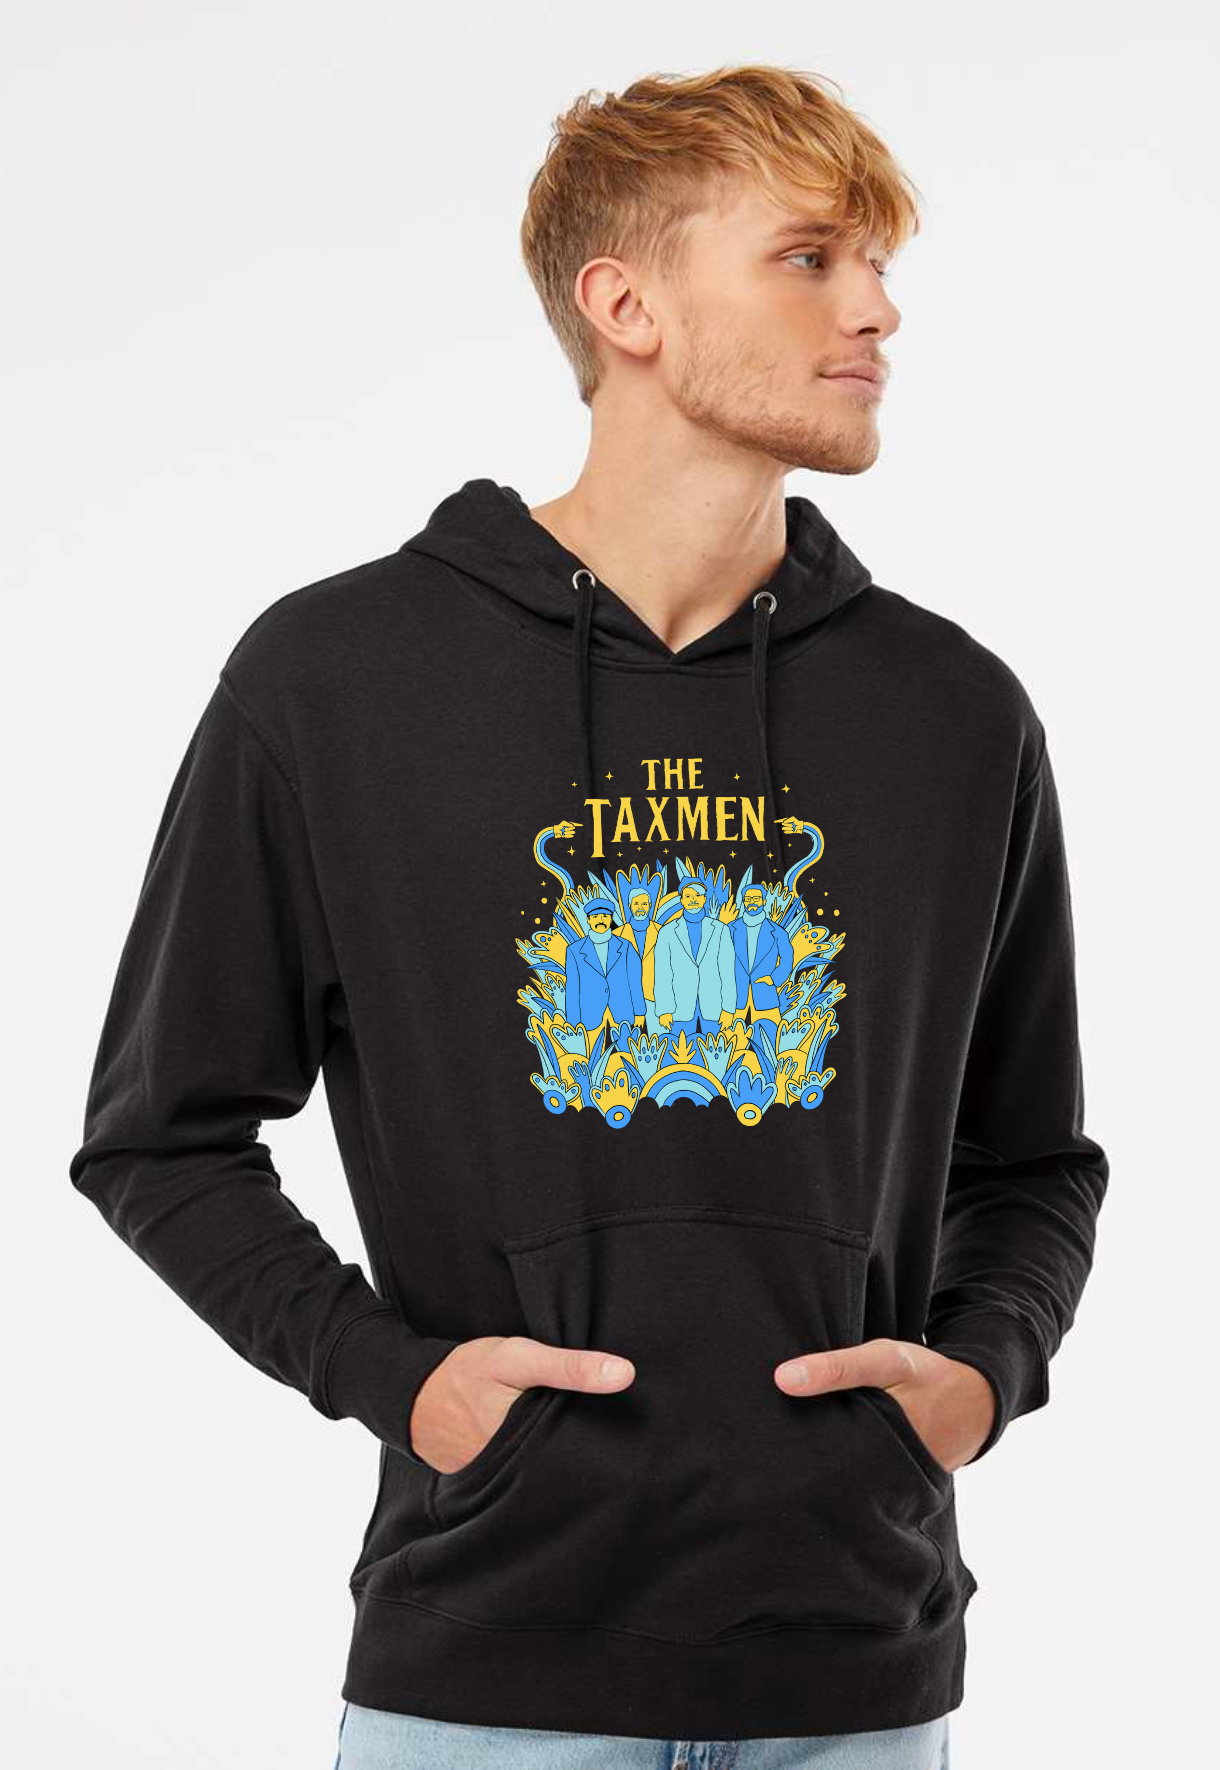 The Taxmen - Blue Submersible - Hoodie Black